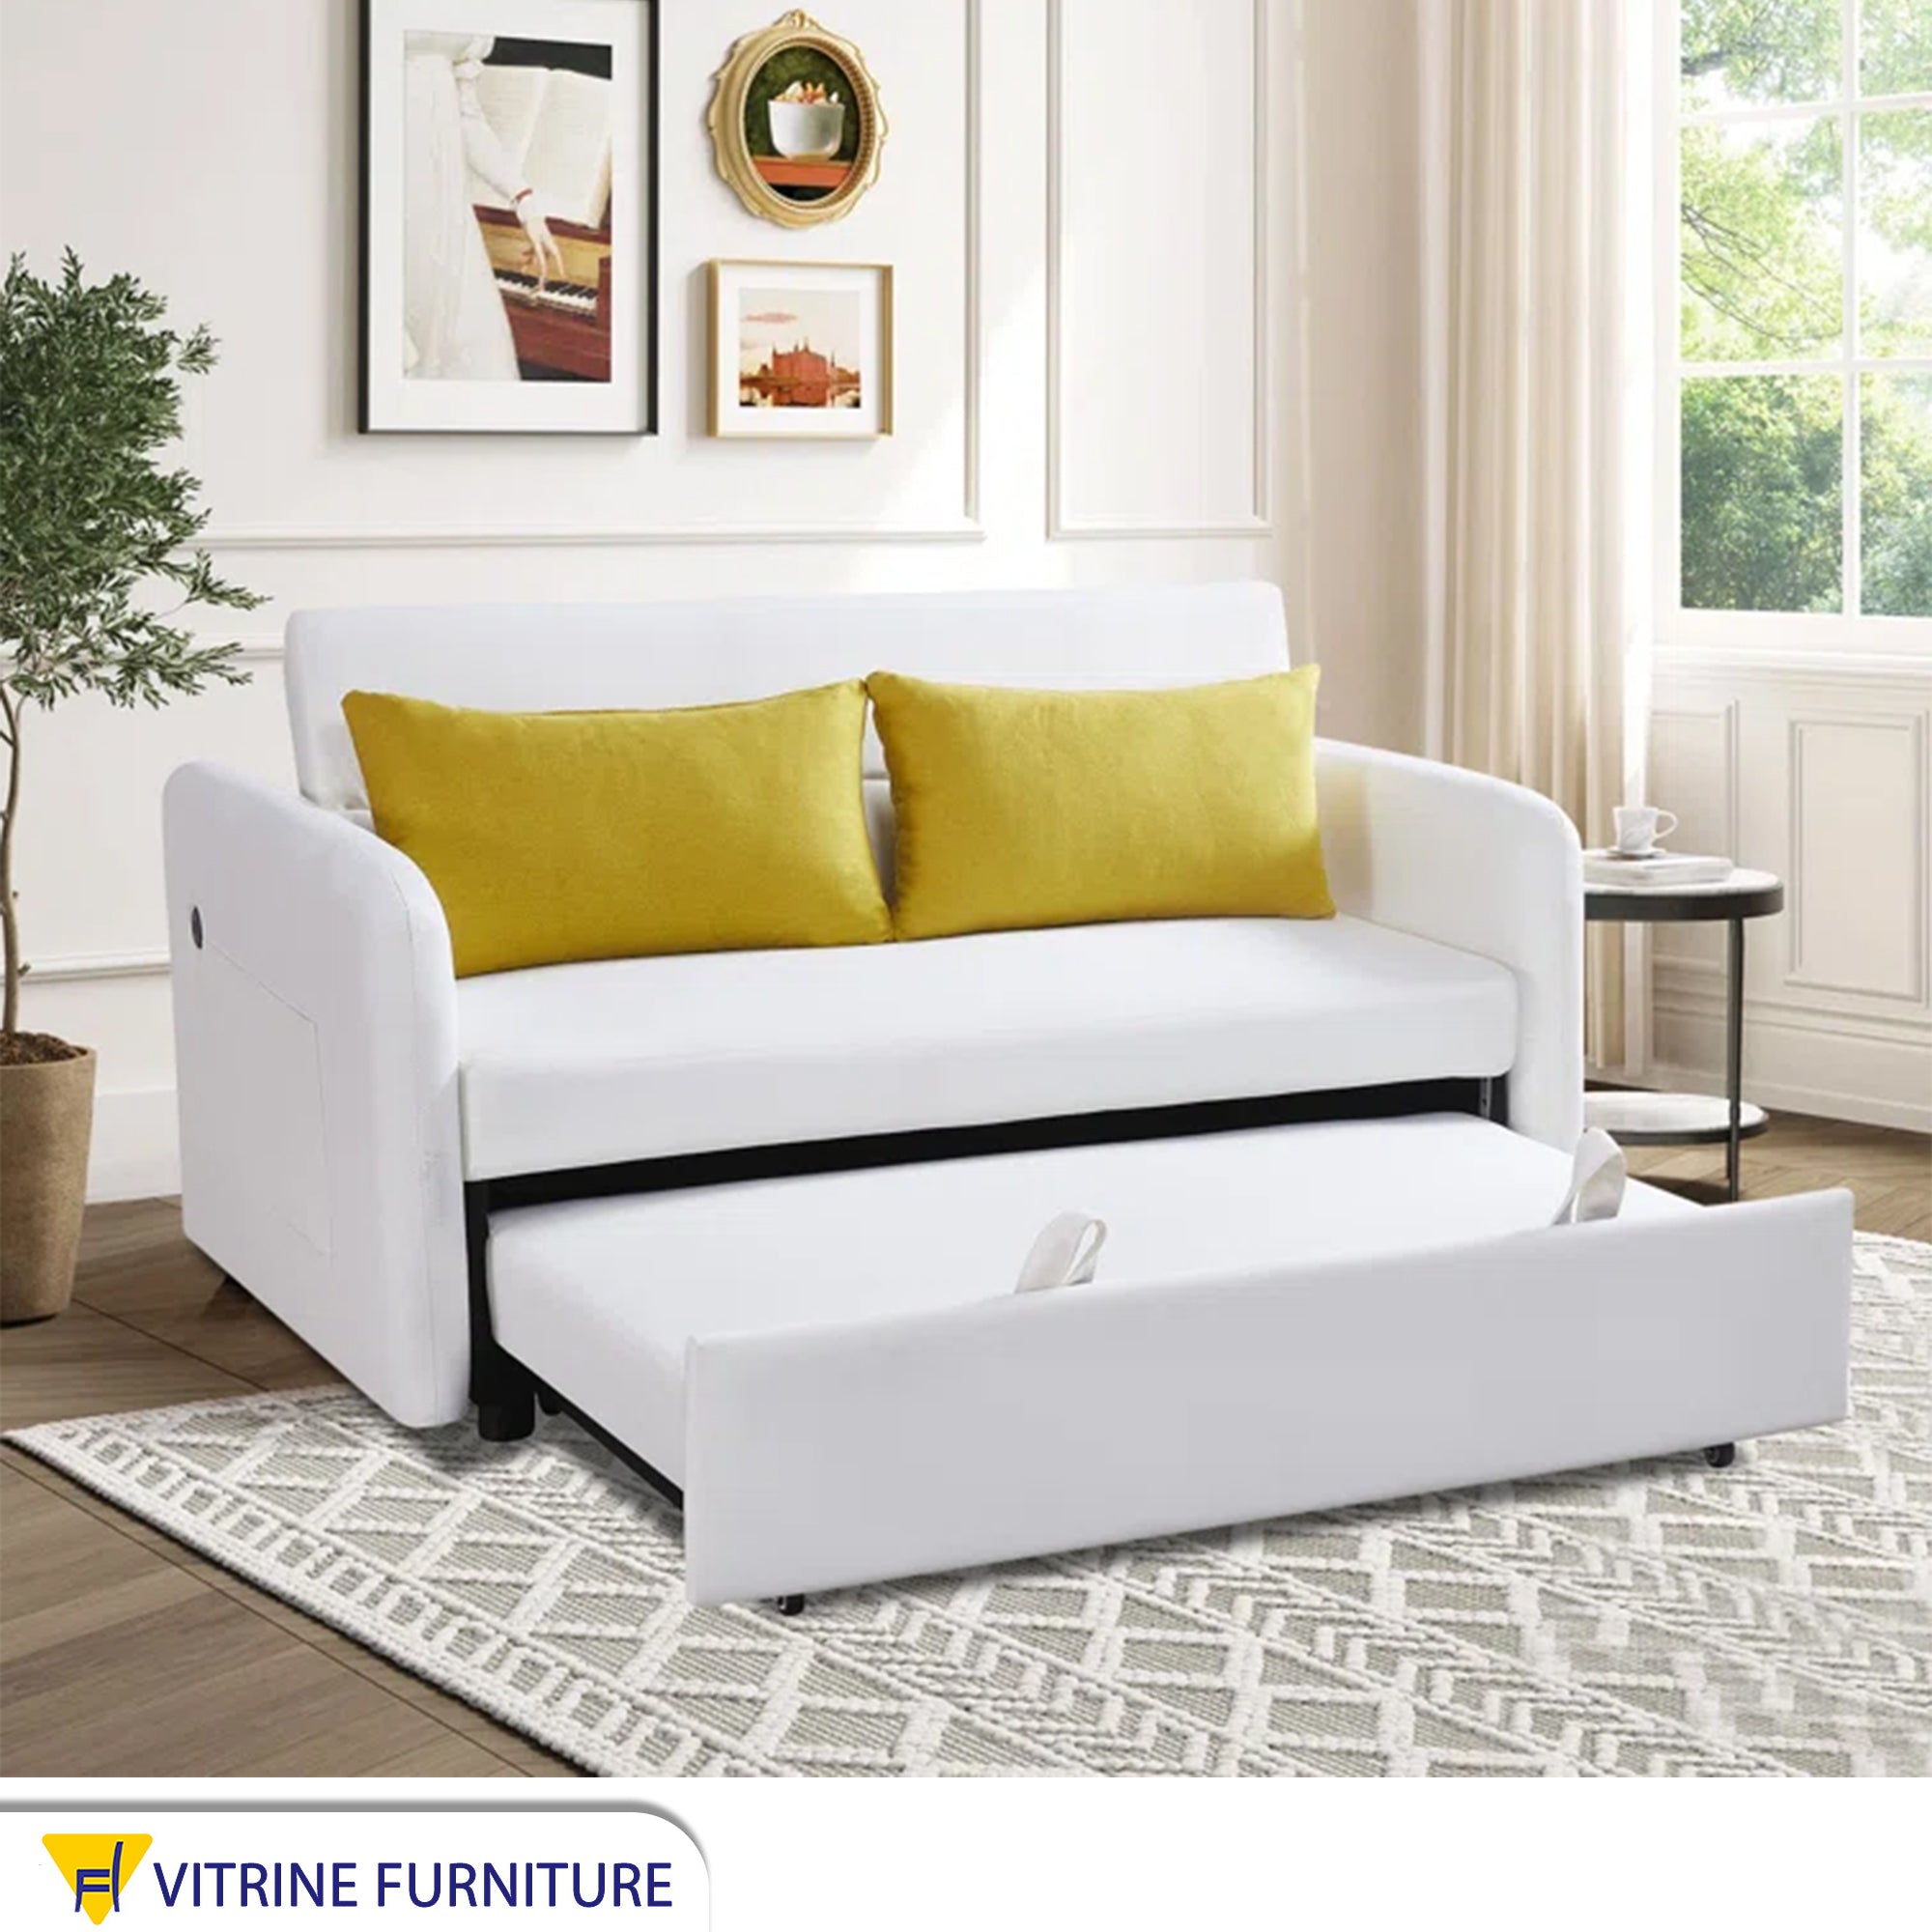 White double sofa bed